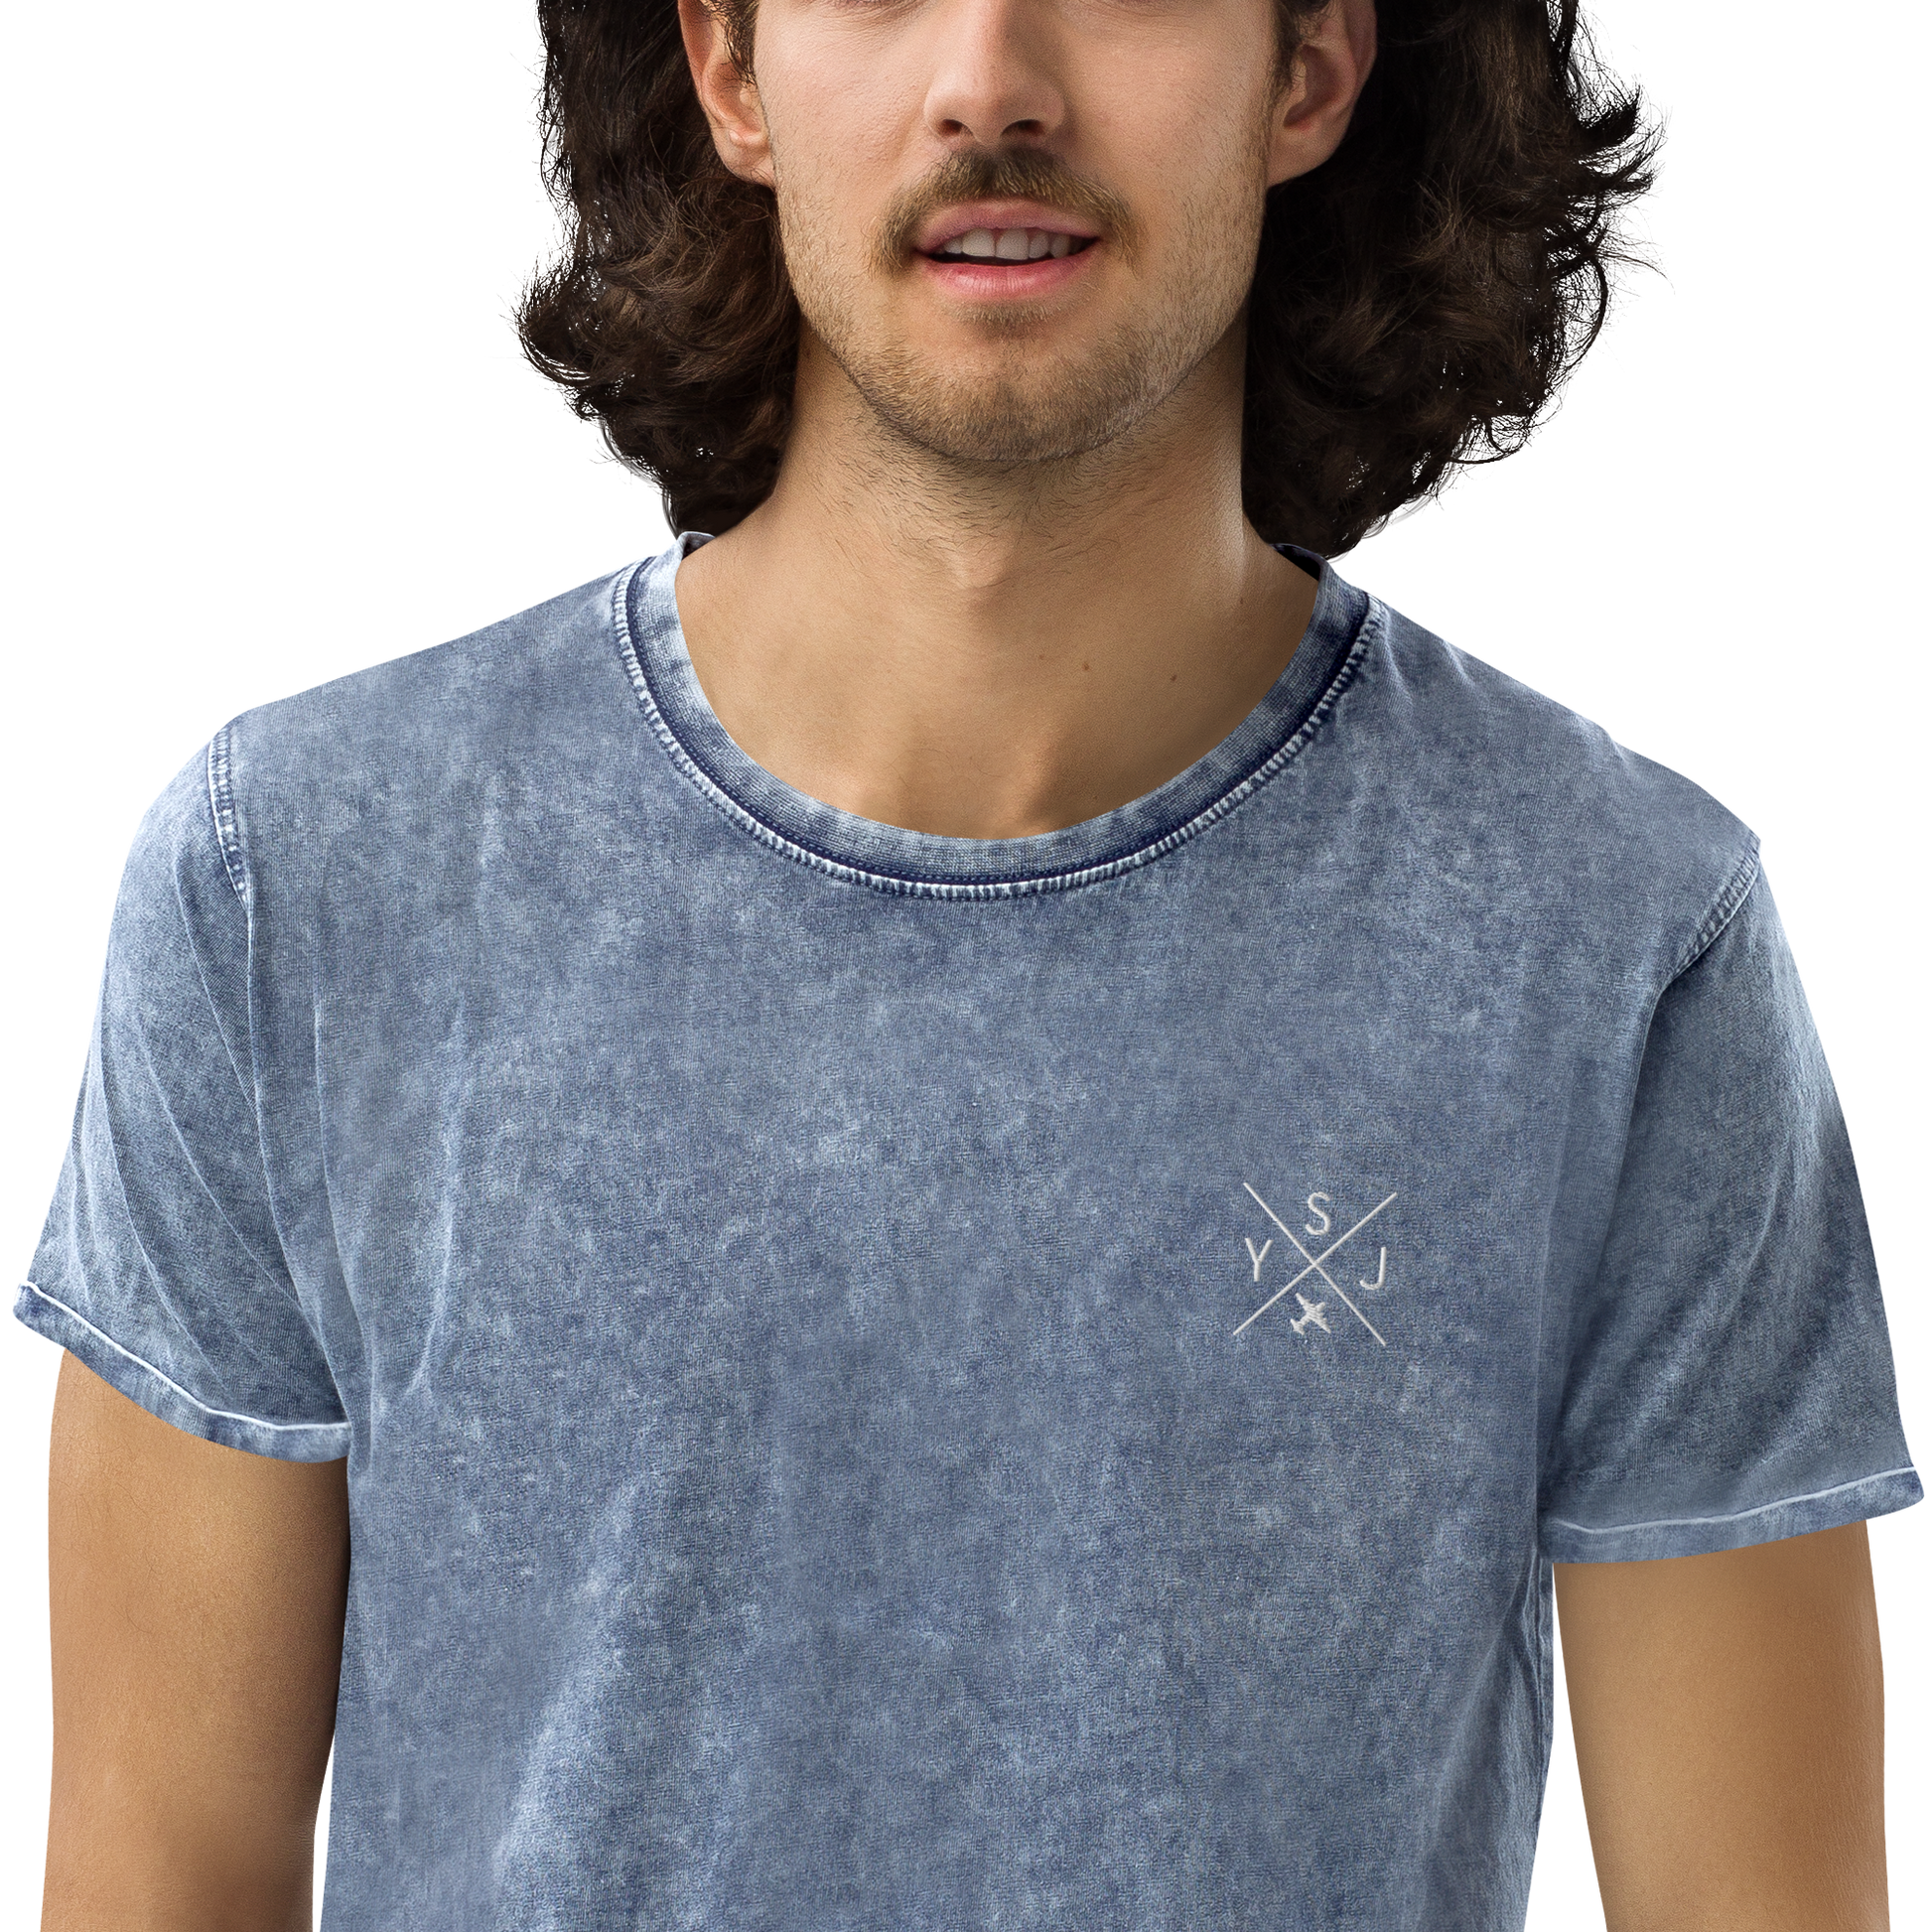 YHM Designs - YSJ Saint John Denim T-Shirt - Crossed-X Design with Airport Code and Vintage Propliner - White Embroidery - Image 12